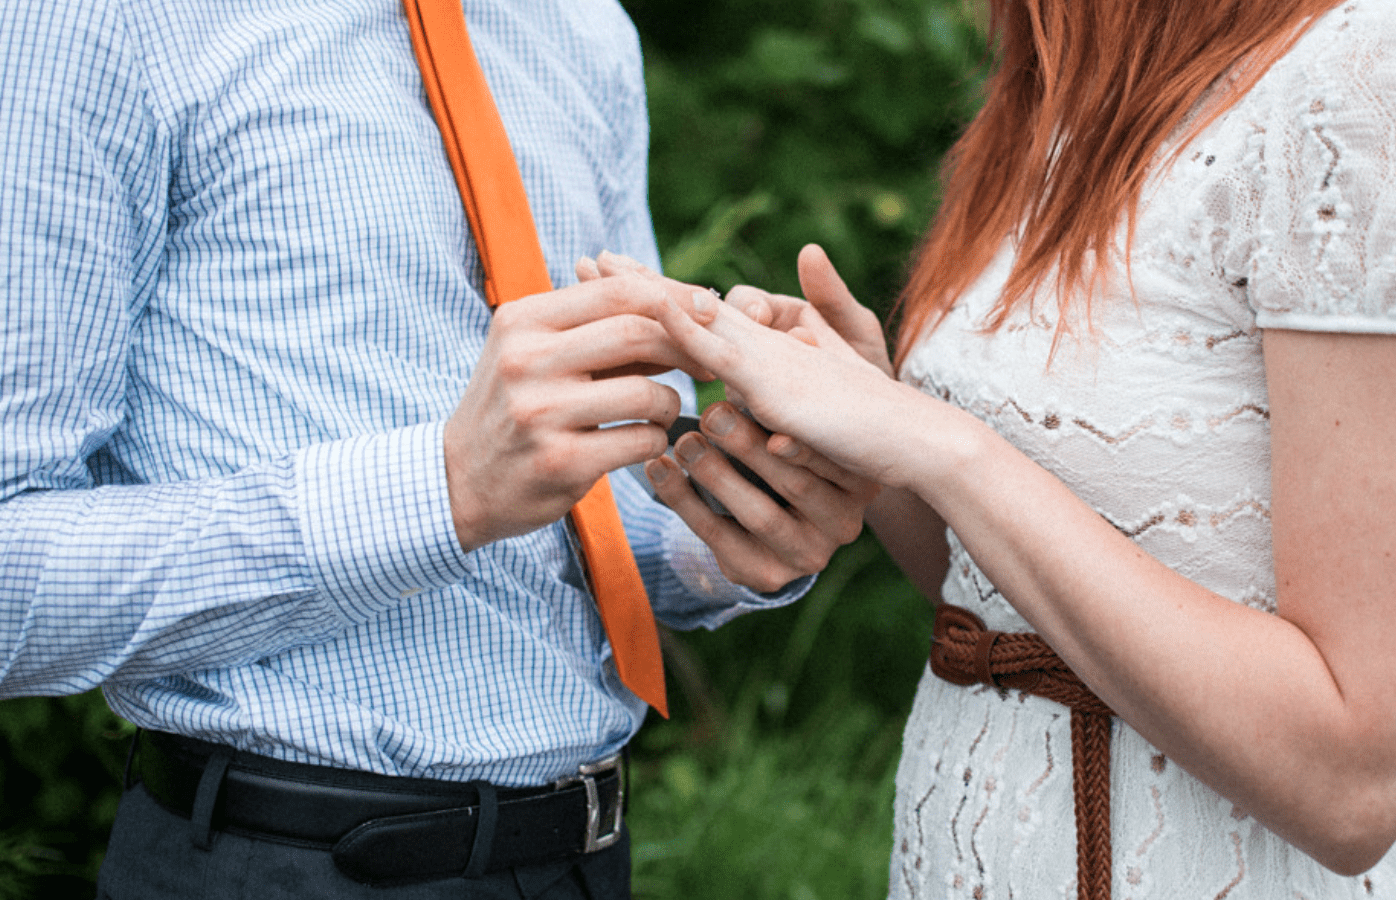 A man places an engagement ring on a woman's finger. | Source: Flickr/Meredith McBride